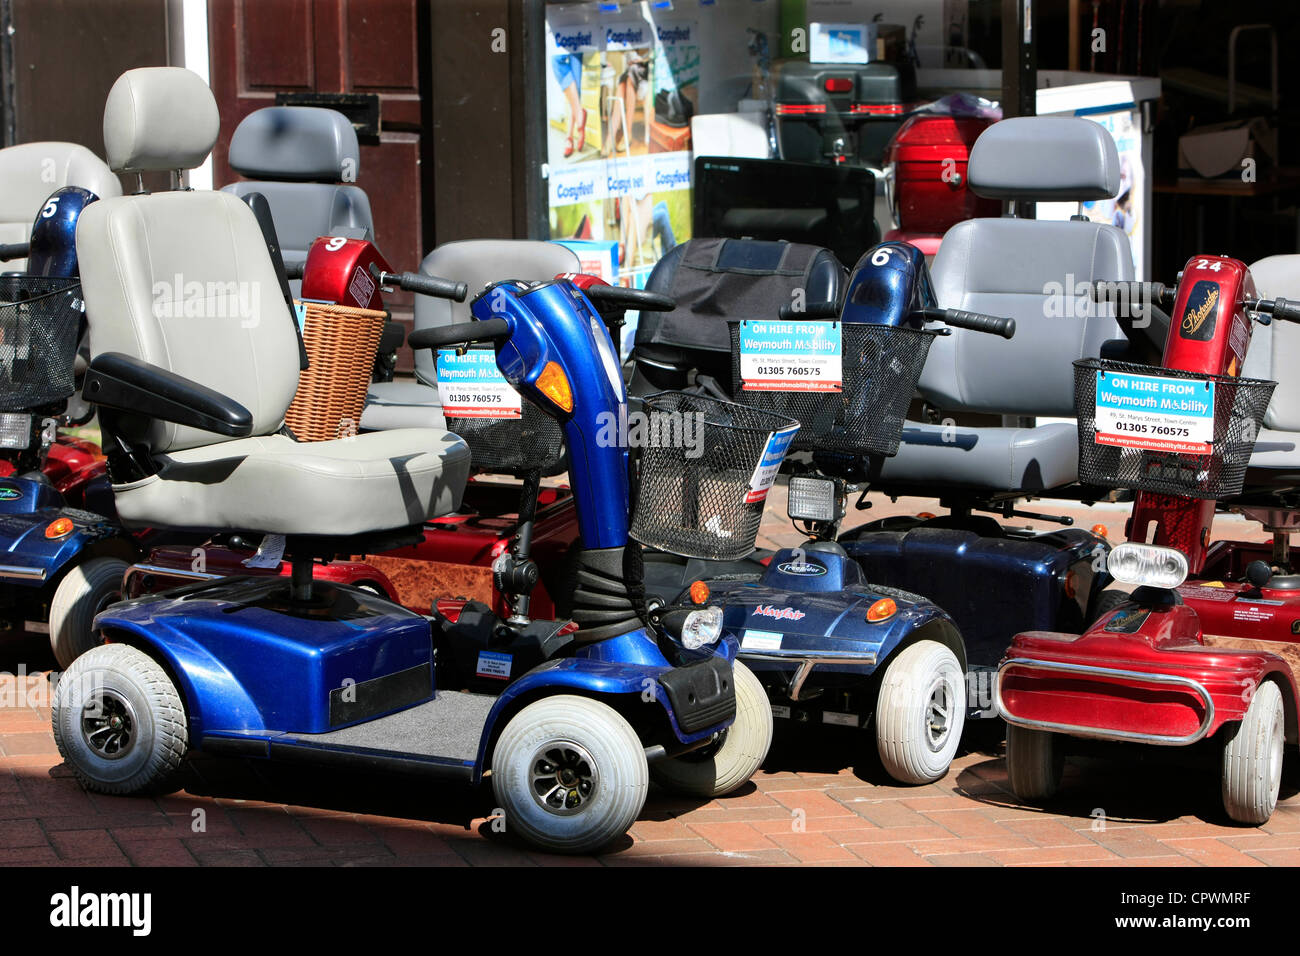 Page 2 - Mobility Scooters High Resolution Stock Photography and Images -  Alamy